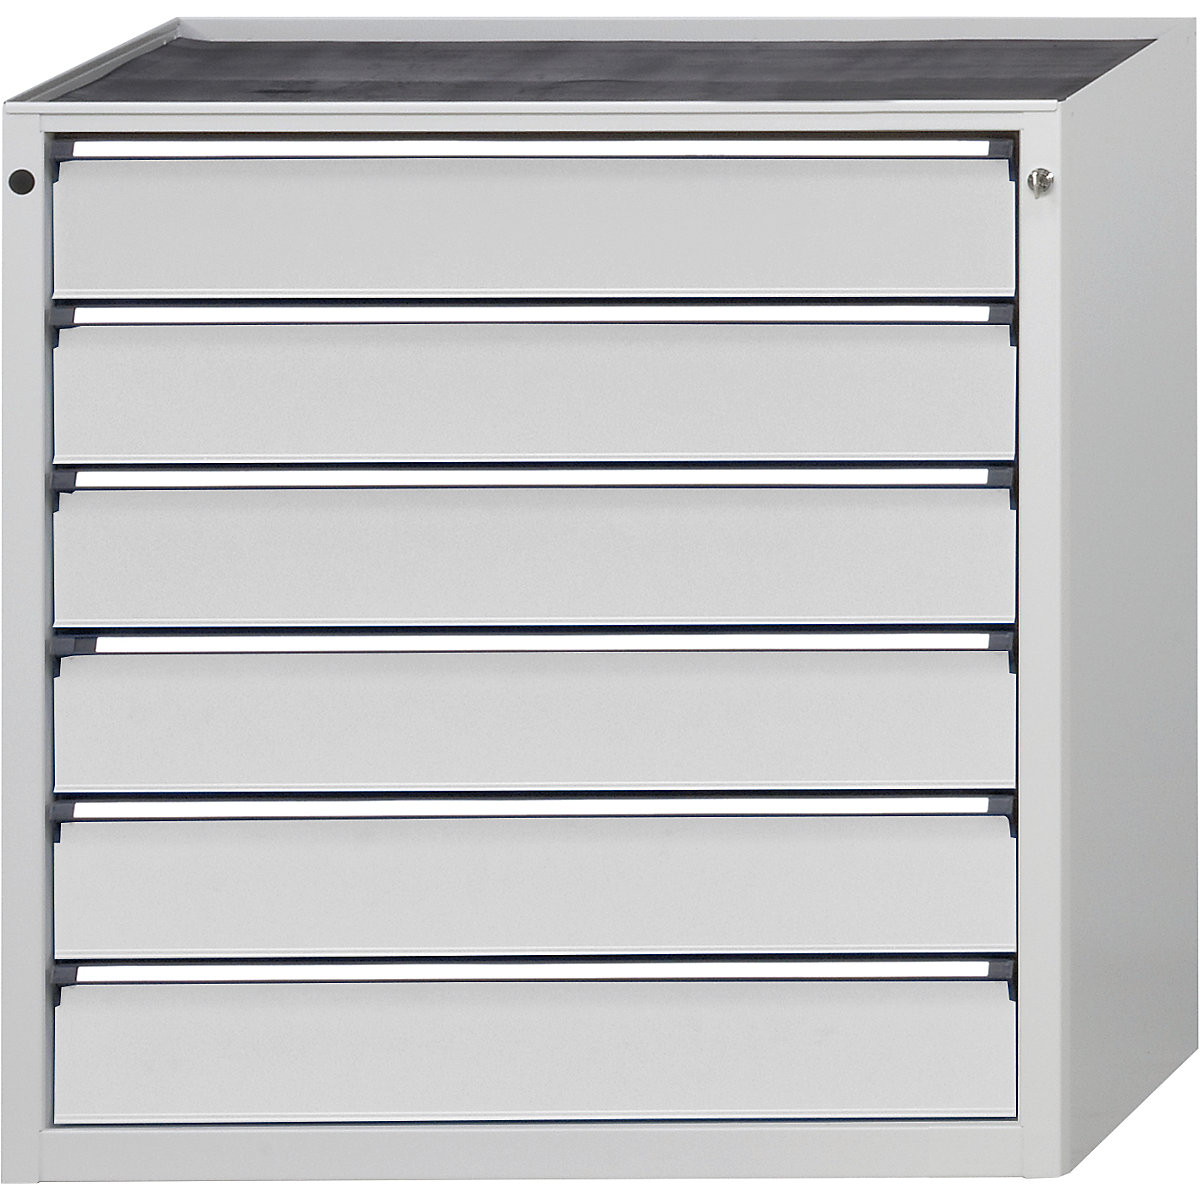 Drawer cupboard – ANKE, WxD 910 x 675 mm, 6 drawers, height 980 mm, front in light grey-4